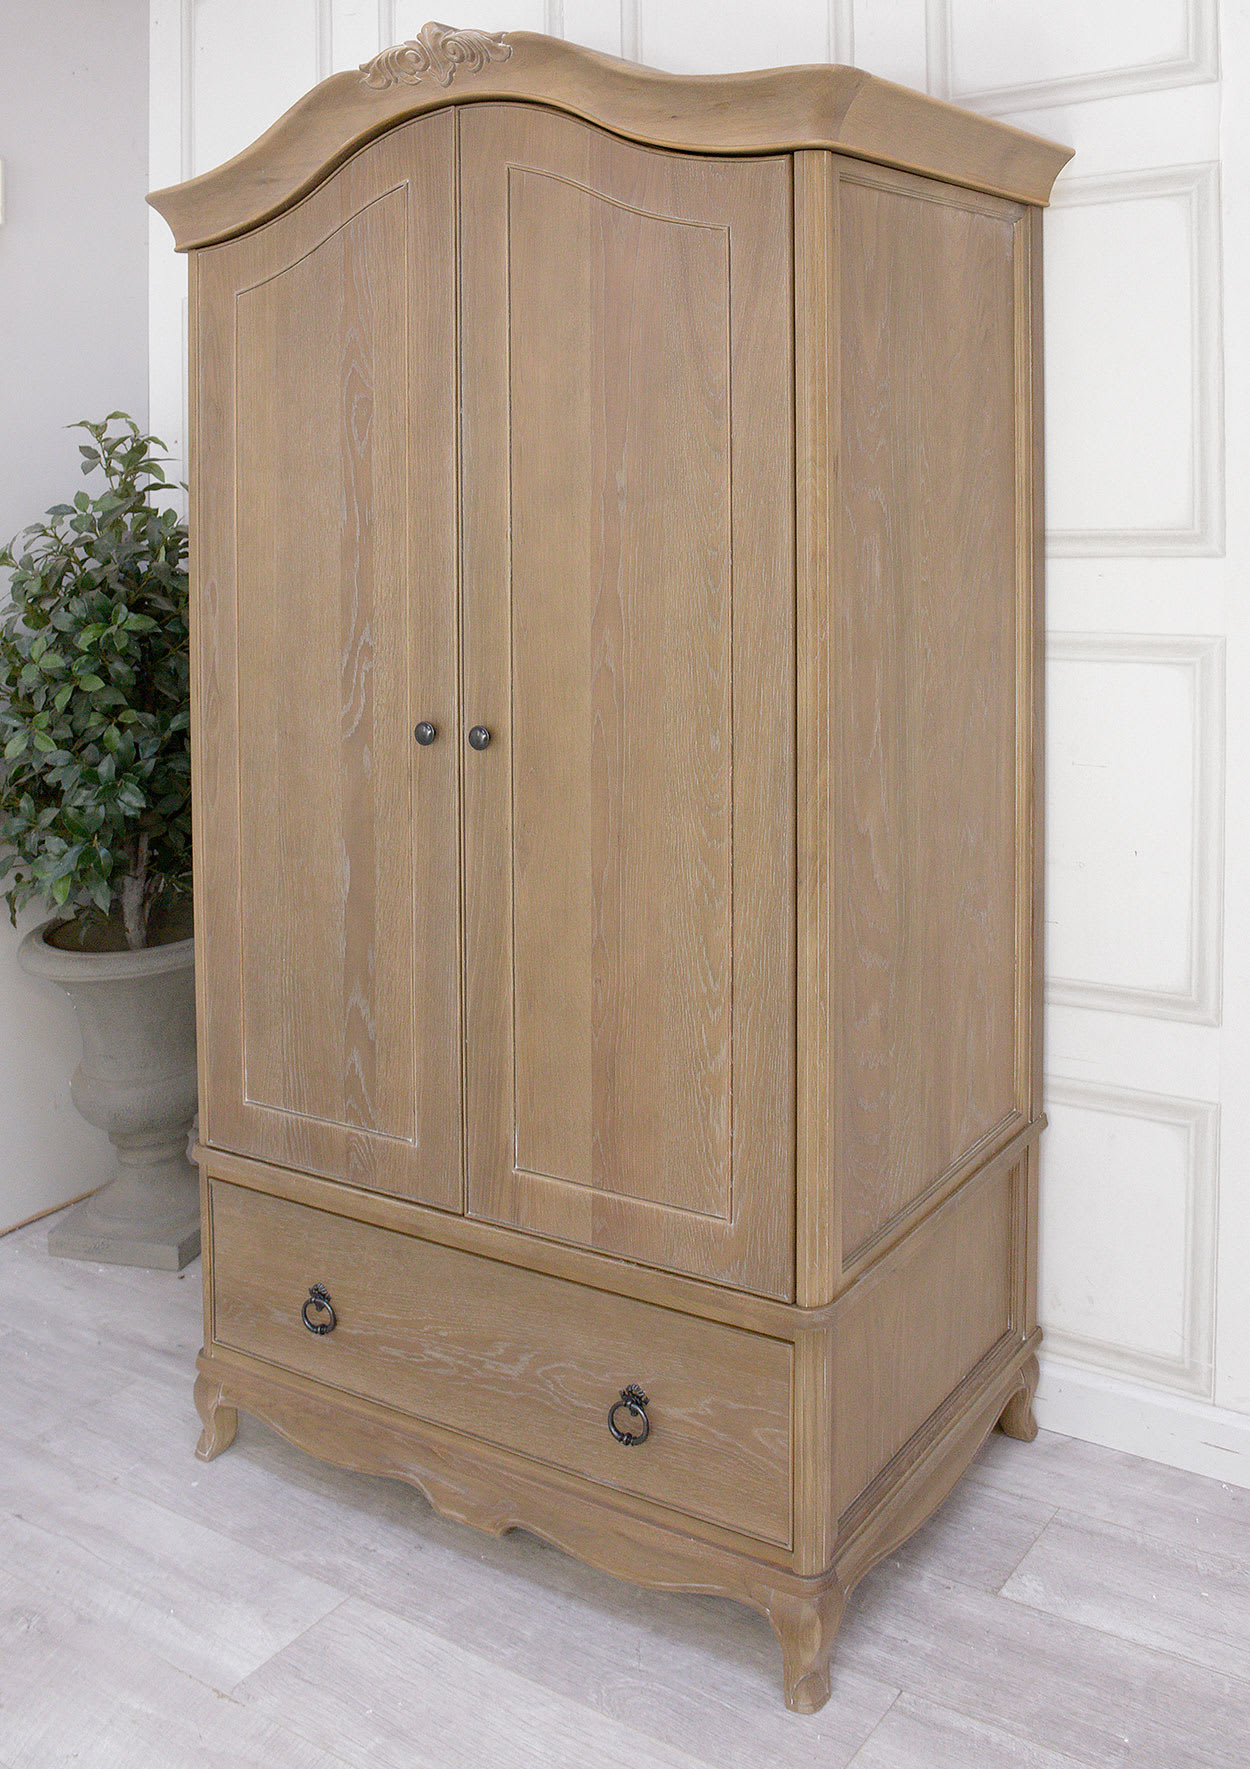 Willis & Gambier Camille Armoire Wardrobe with Drawer